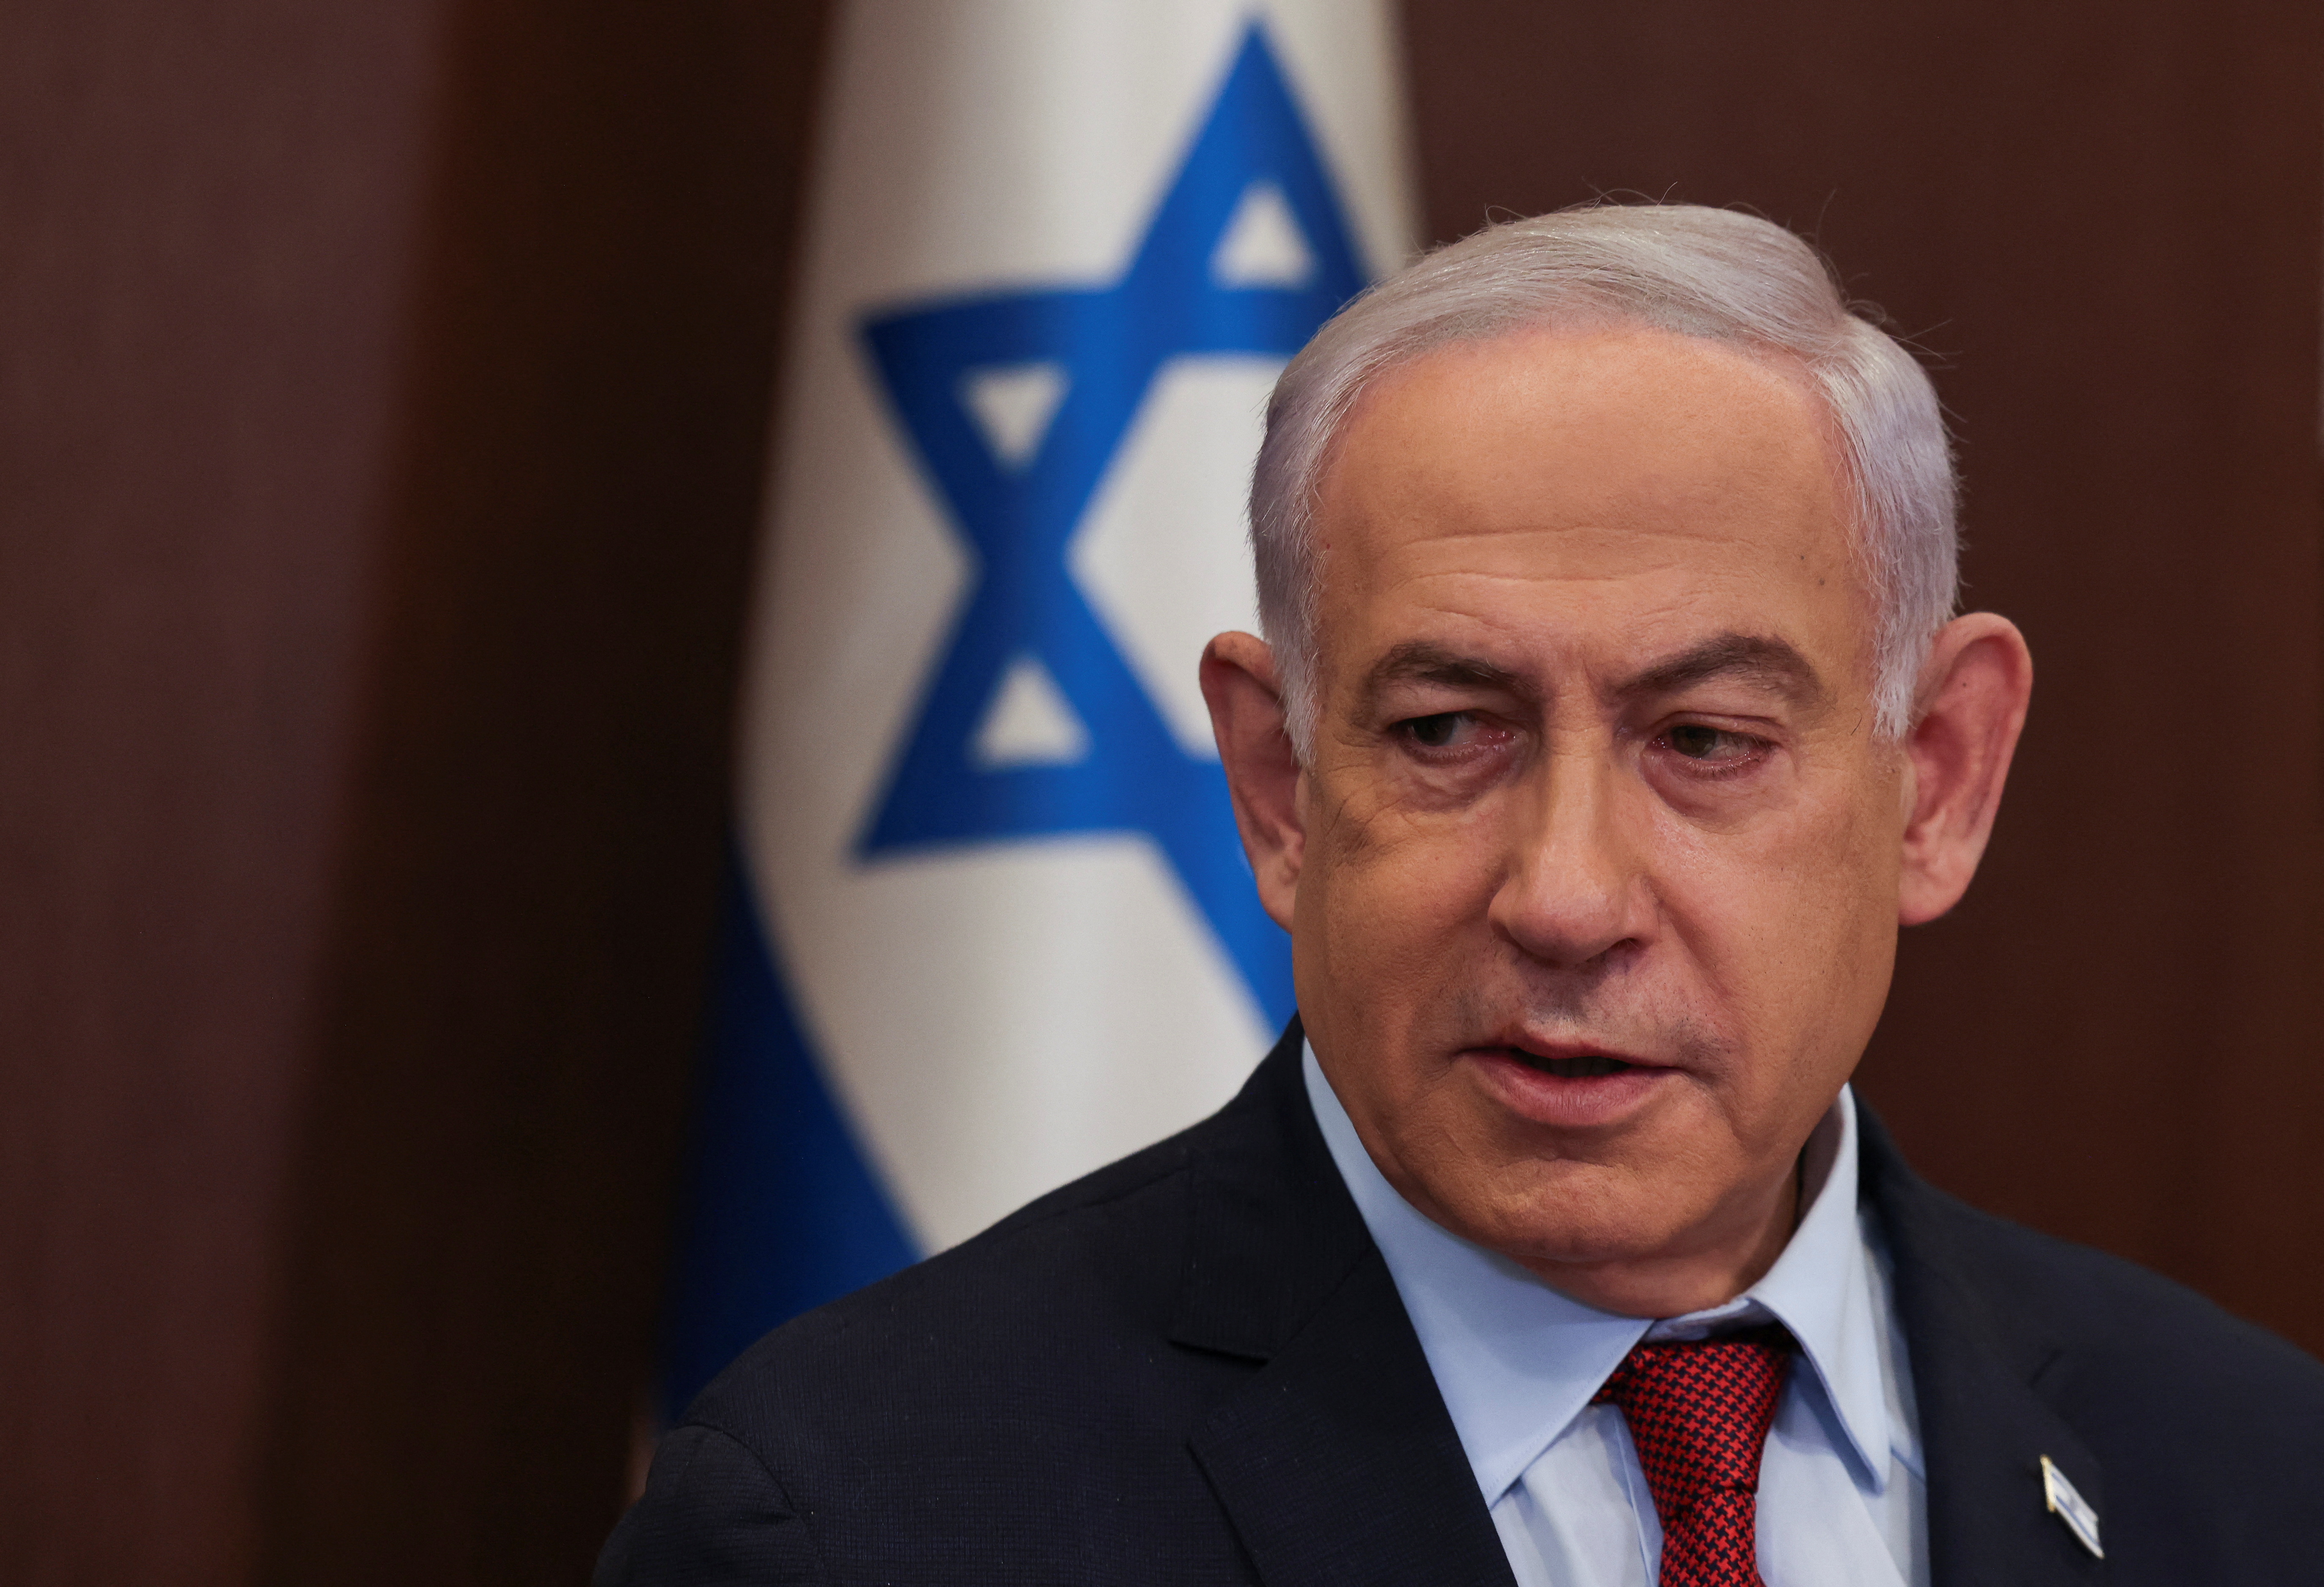 Countries advise against travel to Middle East ahead of likely Iran-Israel war, as Iranian navy seizes ship linked to Israel and Netanyahu condemns terrorists who murdered Israeli boy 🔥